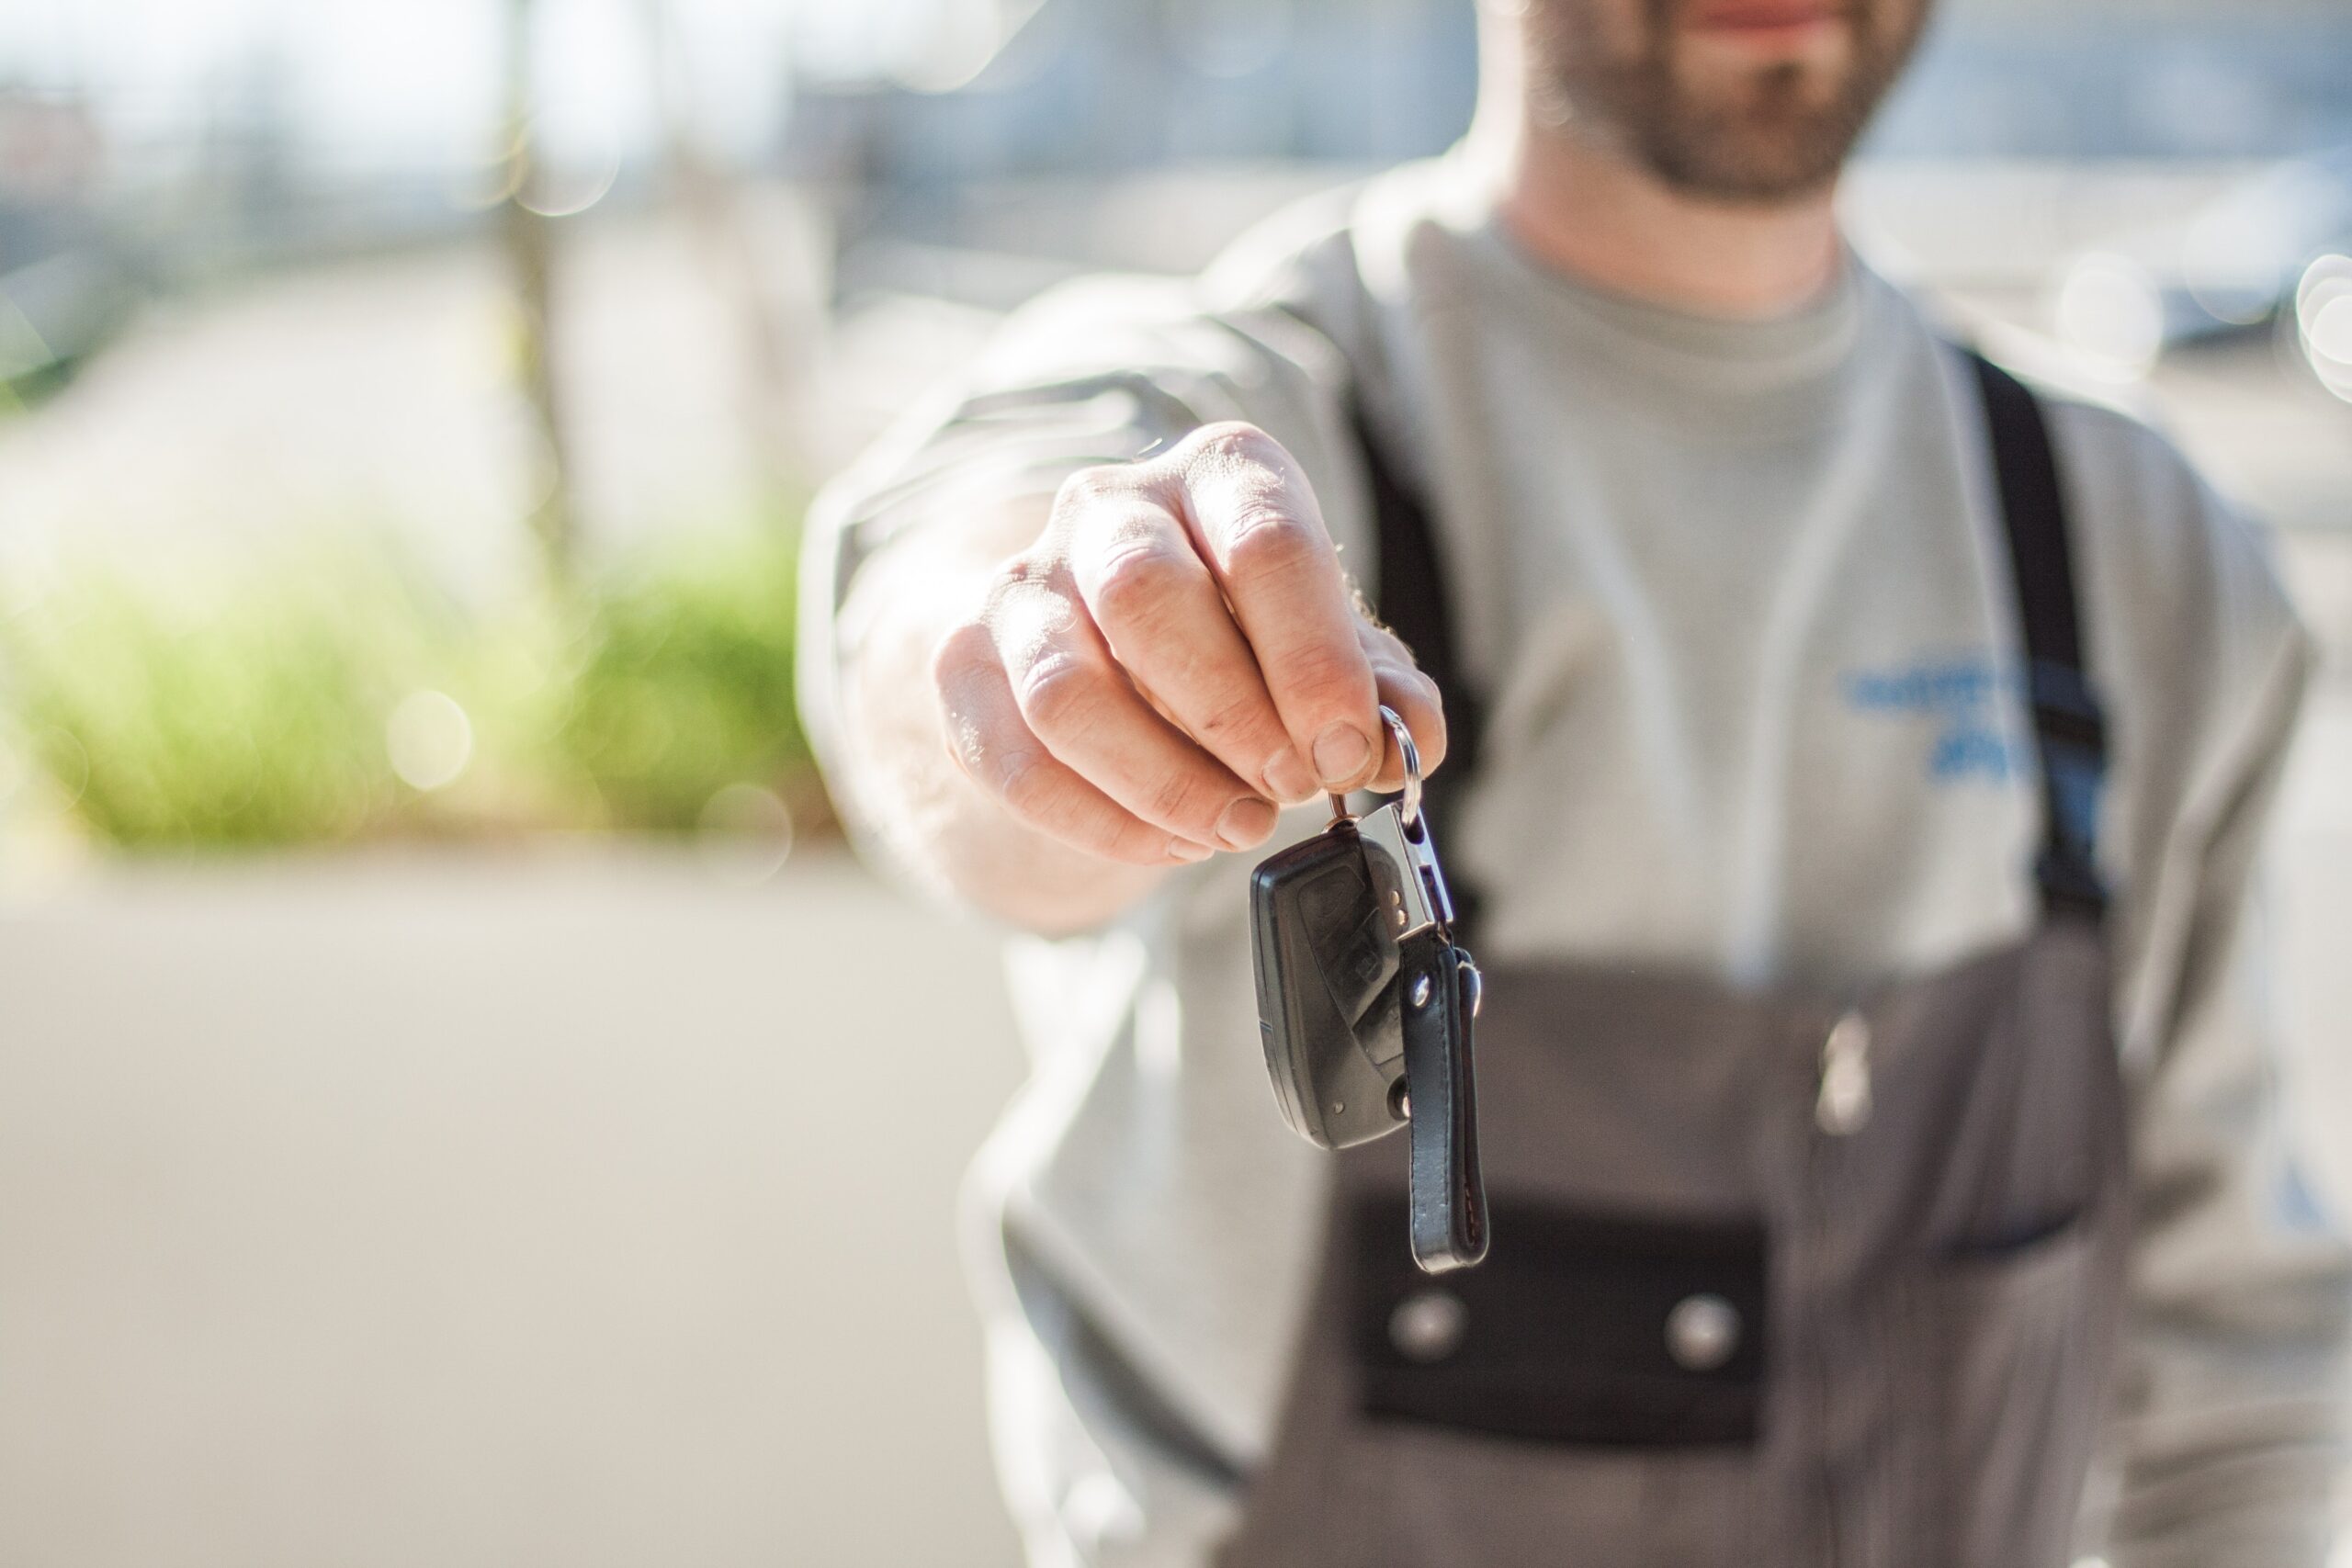 How Much Does a Replacement Car Key Cost in the UK